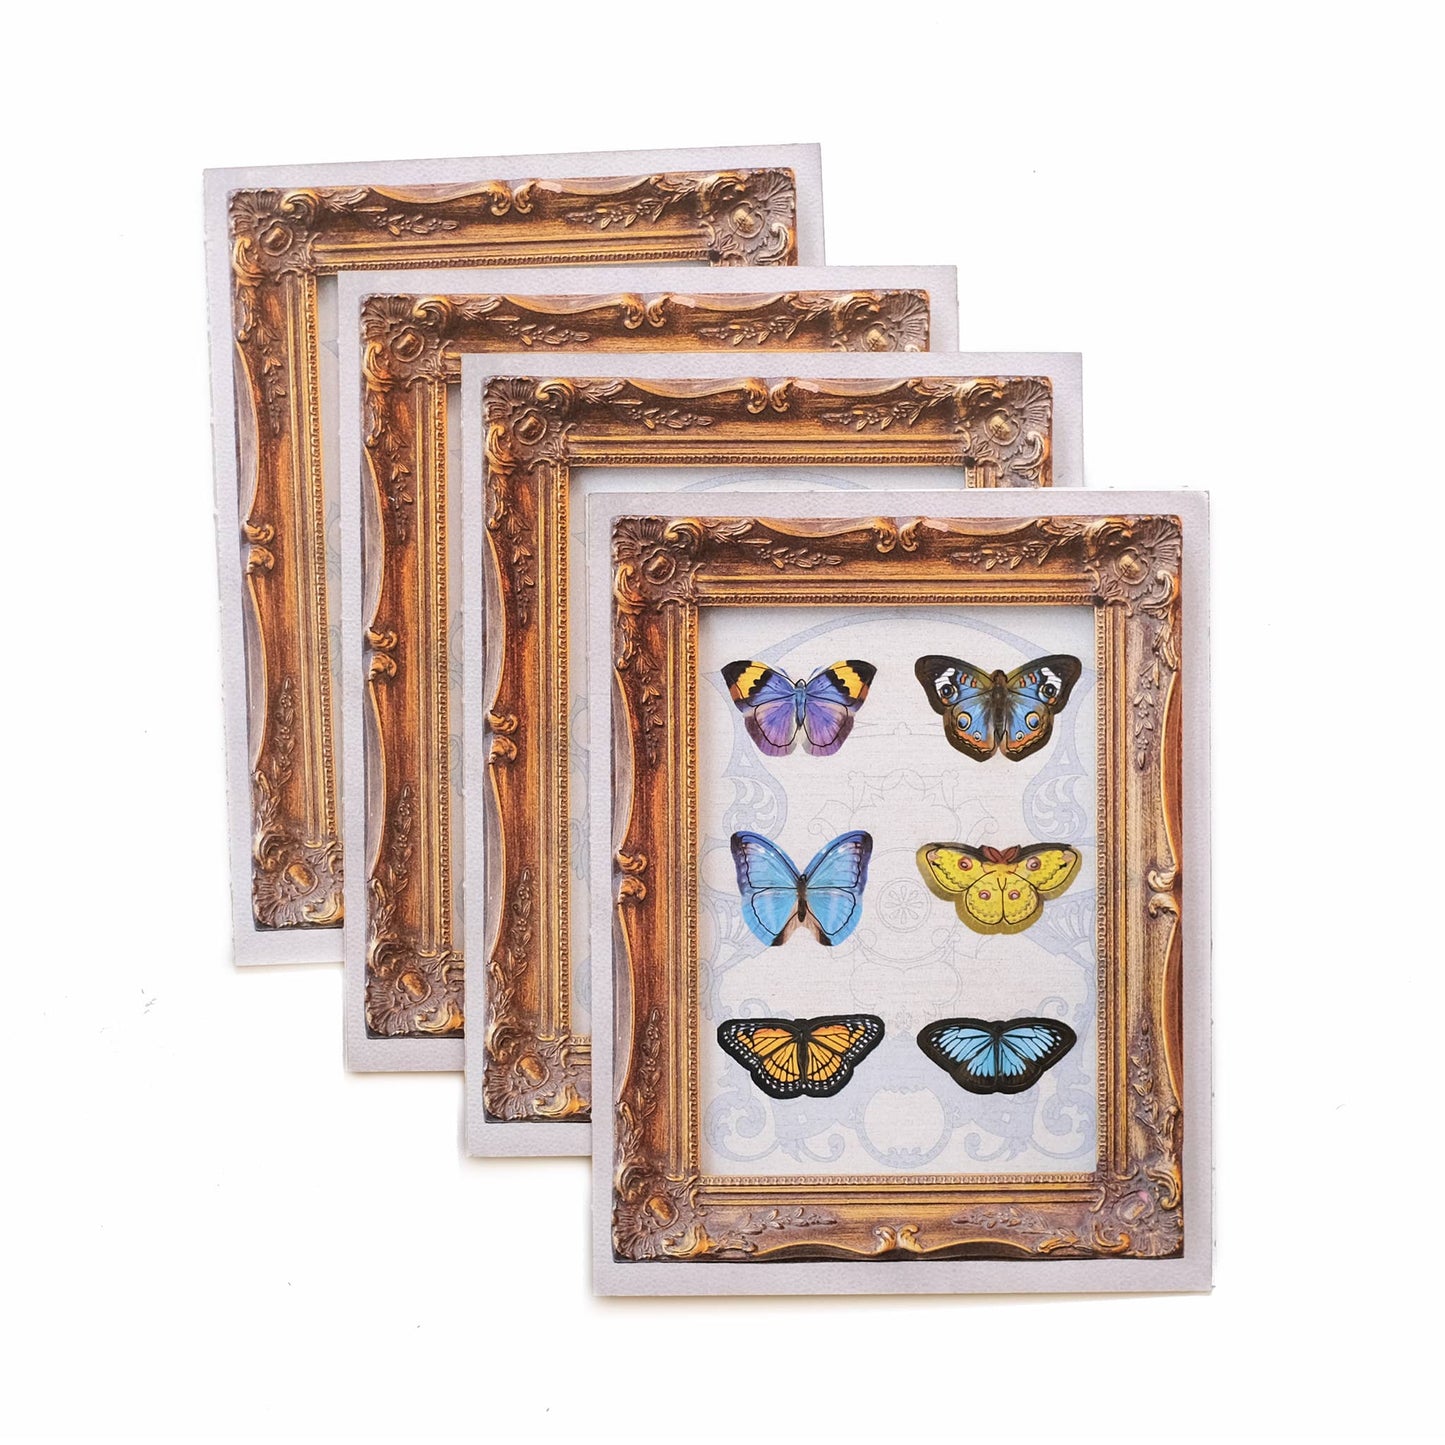 'Sunny' Mini Butterfly 'Pop-Out' Greeting Card